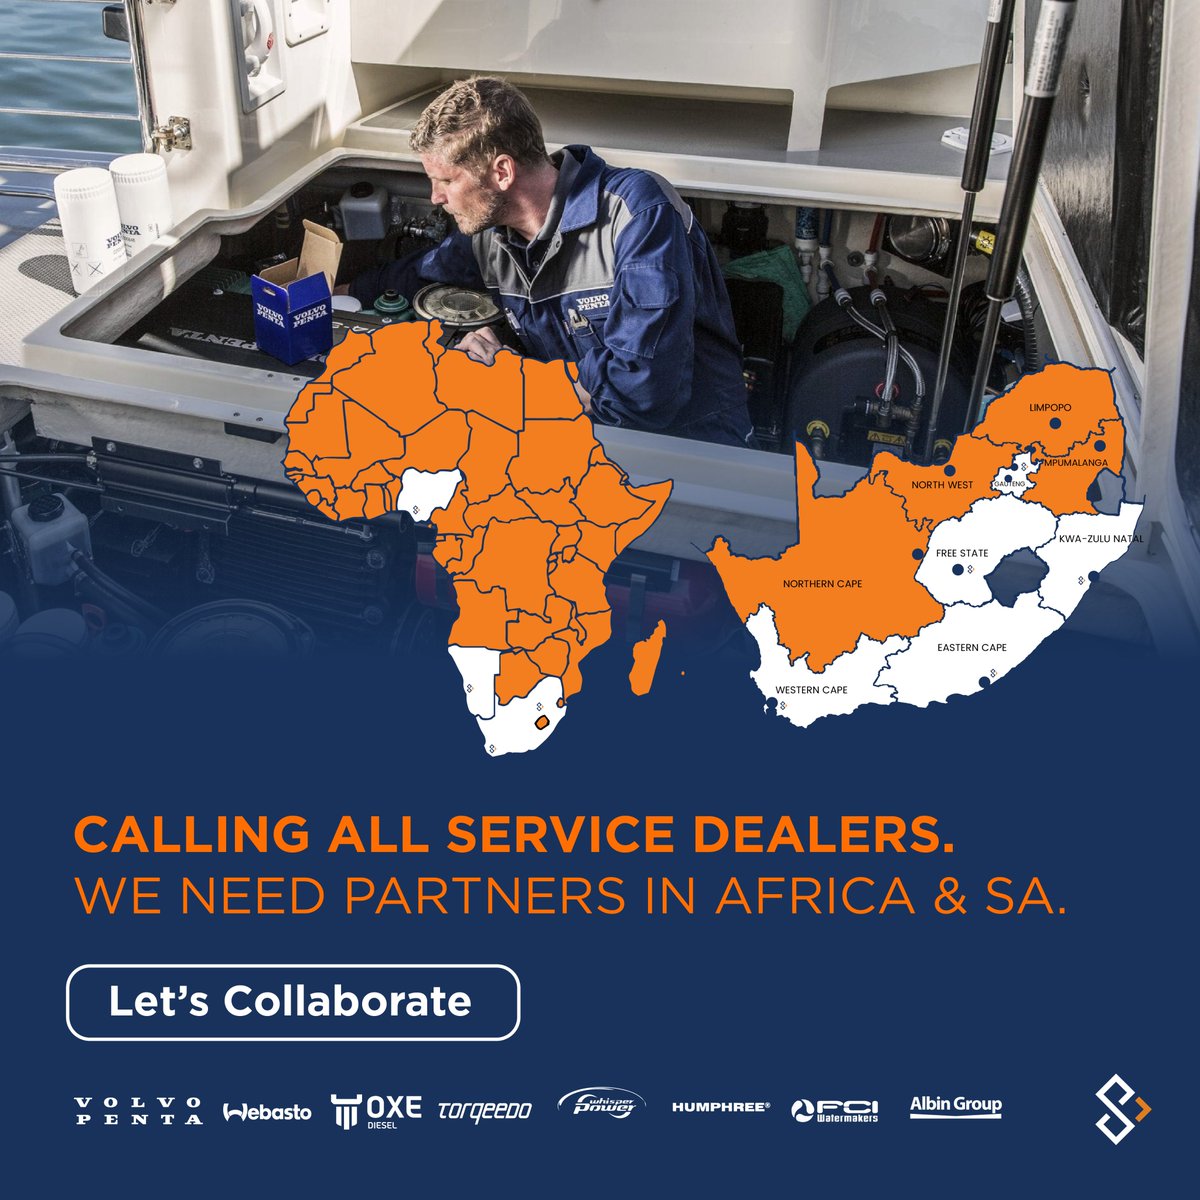 We are looking for new service dealers in Gauteng for Volvo Penta, Webasto & WhisperPower products plus sales and services dealers for Oxe & Torqeedo in East/West Africa. Email services@southernpower.co.za to join us. #Gauteng #PortElizabeth #EastLondon